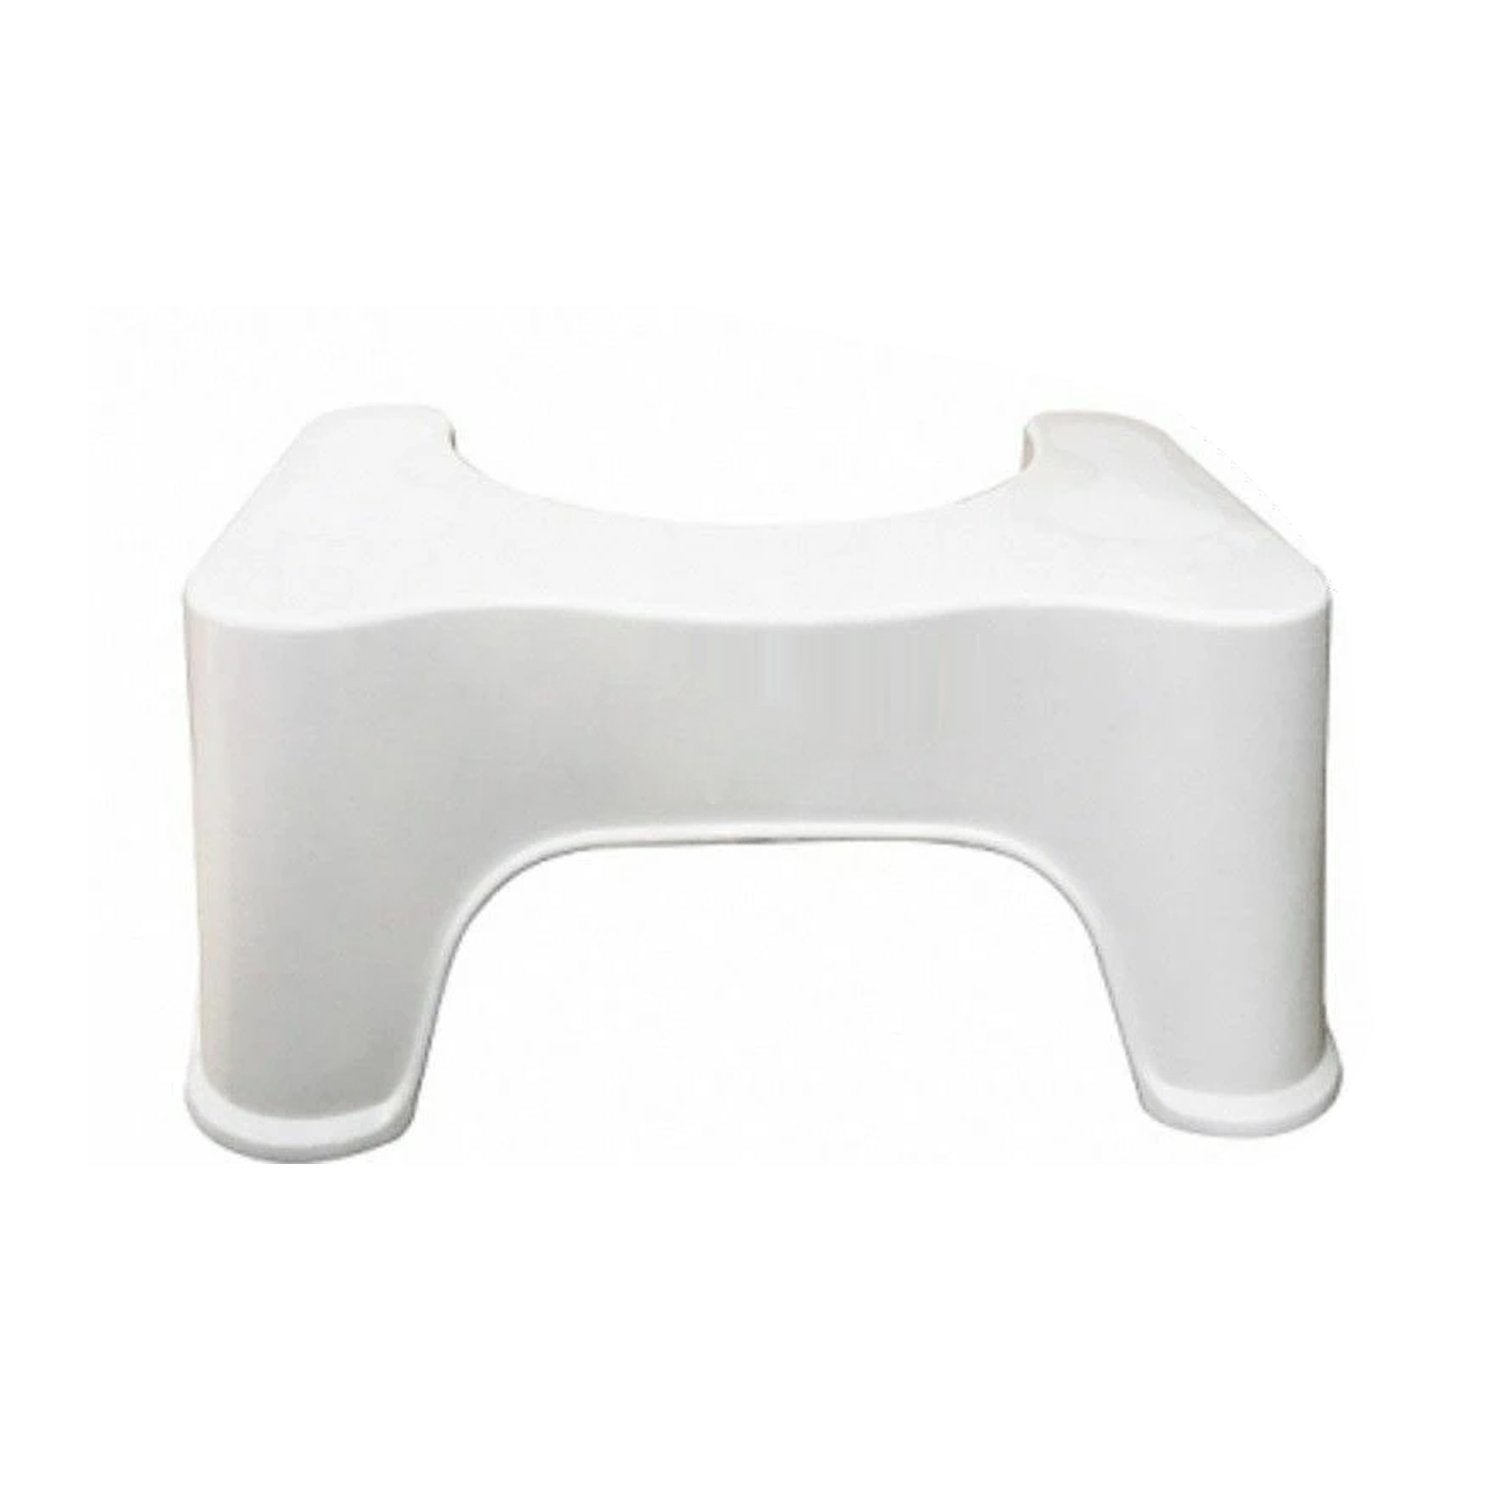 Toilet Stool Sit And Squat Squatty Potty - 8.5 inch